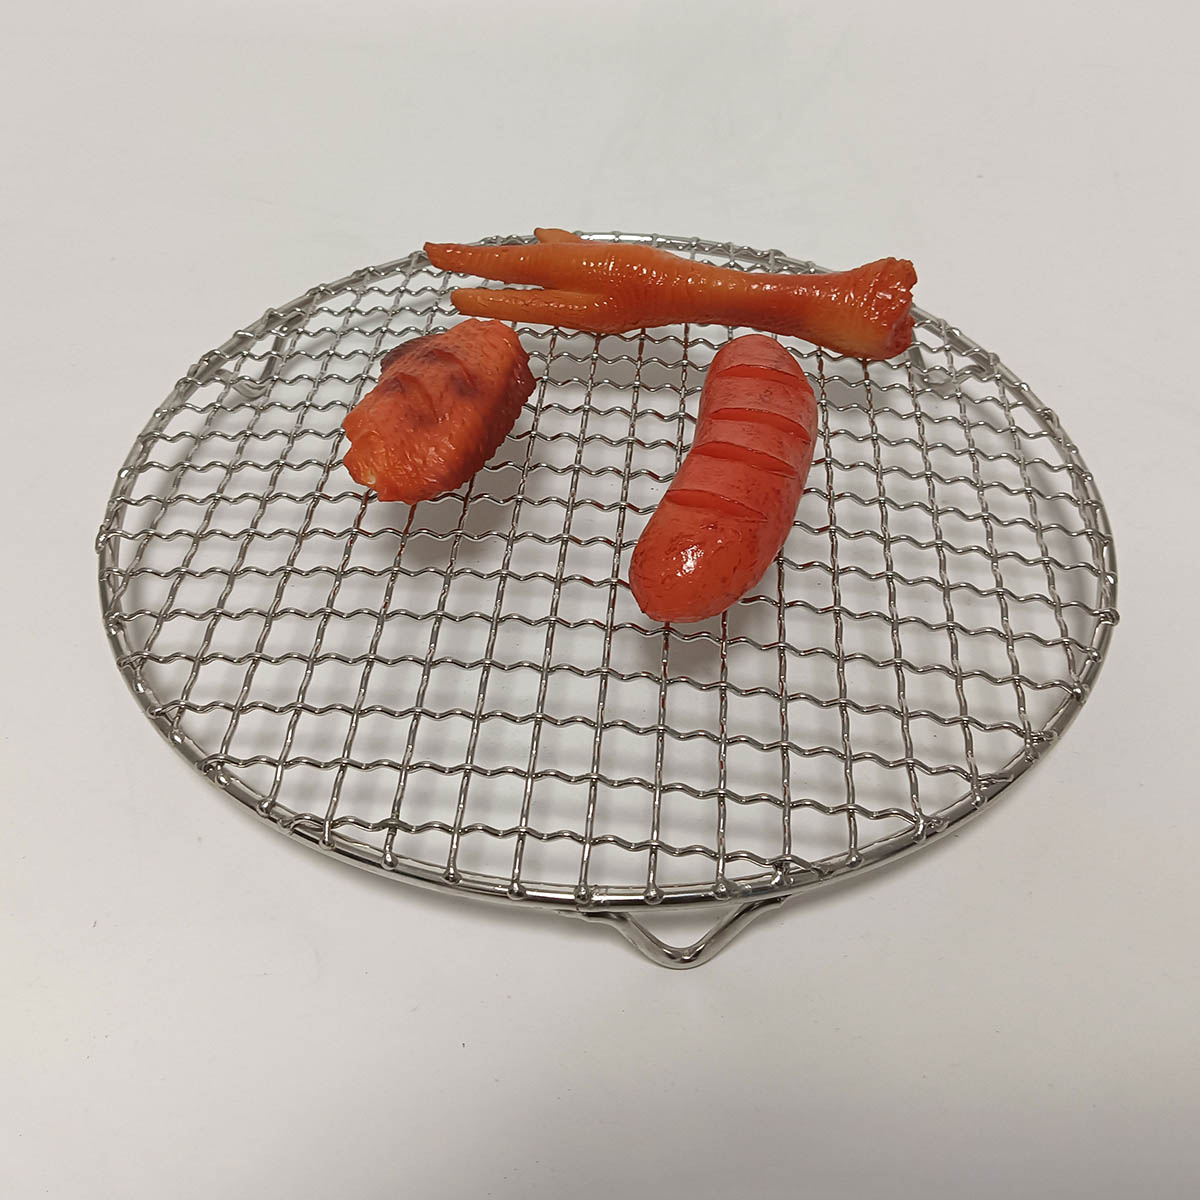 SS Barbecue wire mesh grill for cooking